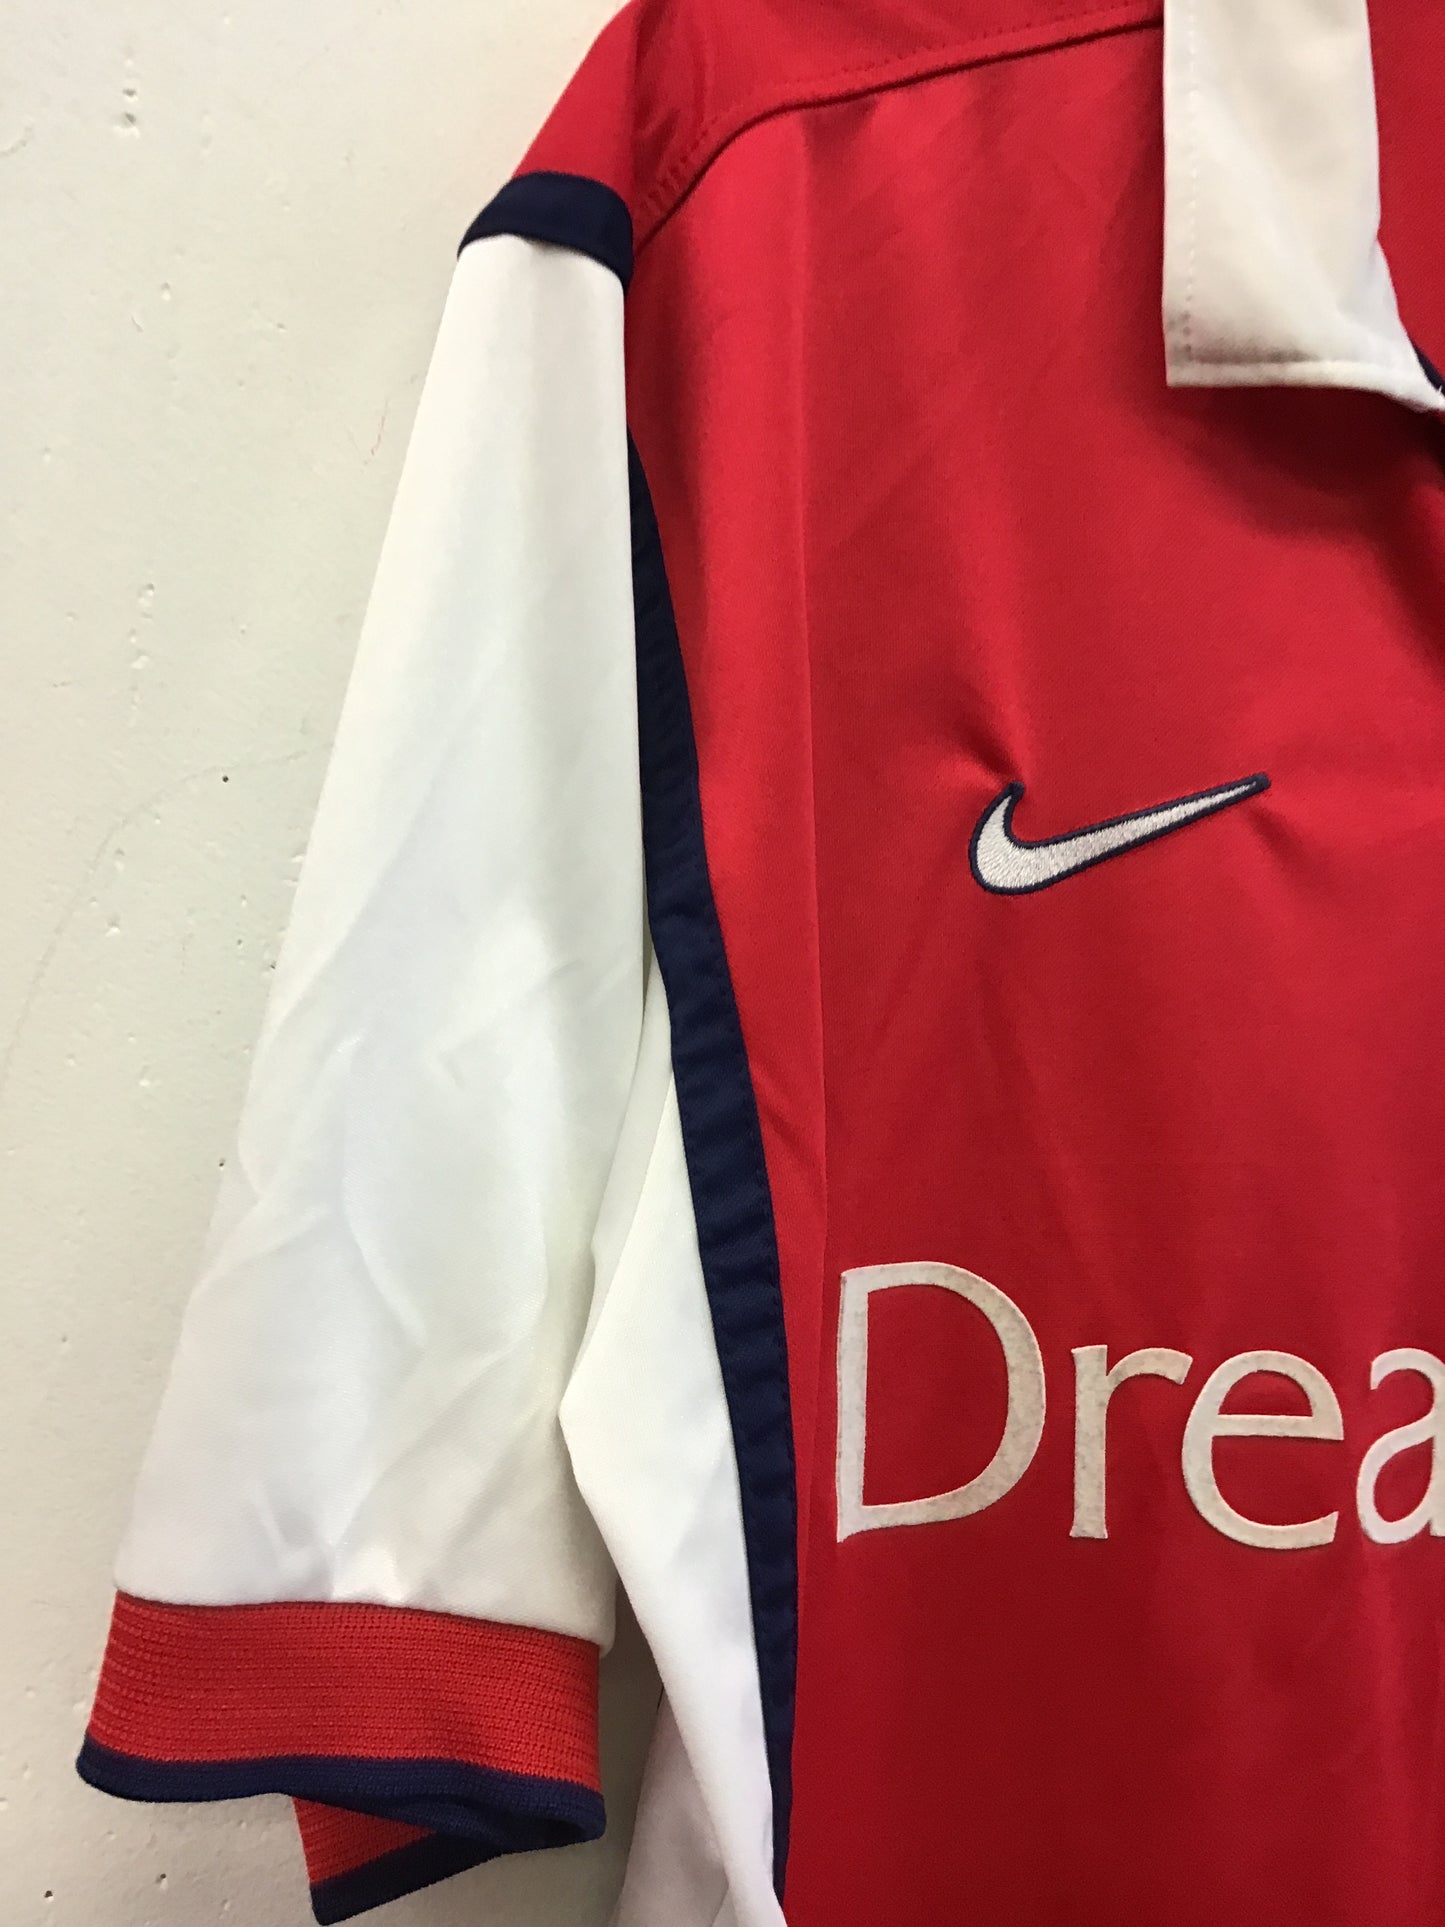 Nike Arsenal Gunners Dreamcast Engineered 98-99 Home Jersey, Size M